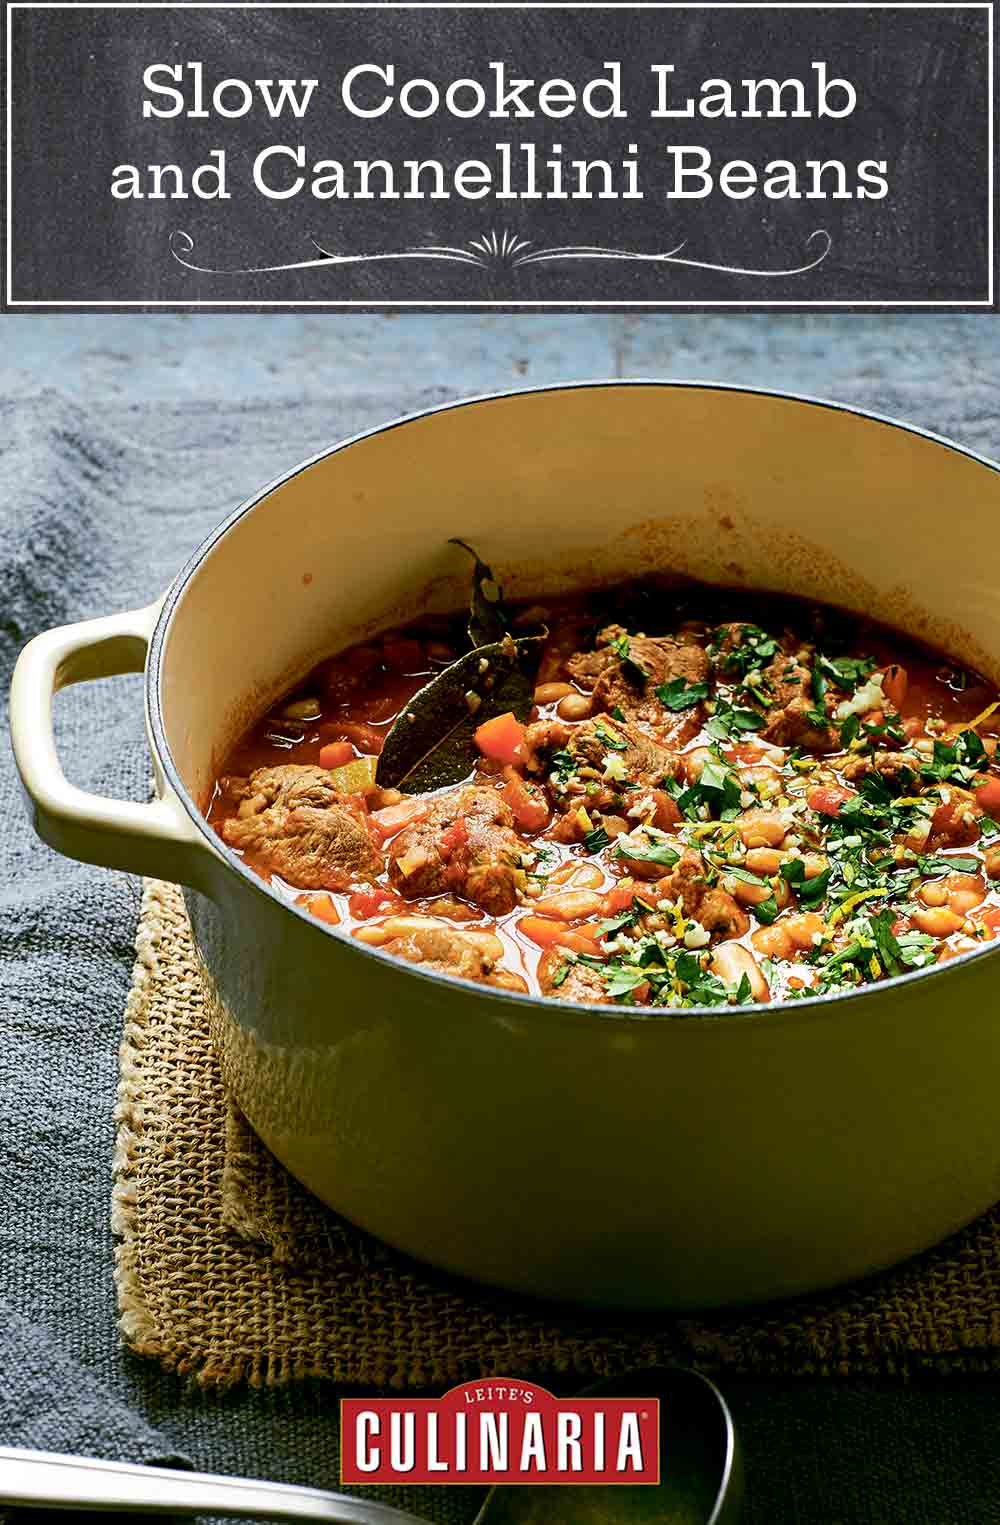 A round green Dutch oven filled with slow cooked lamb and cannellini beans on a brown burlap cloth.